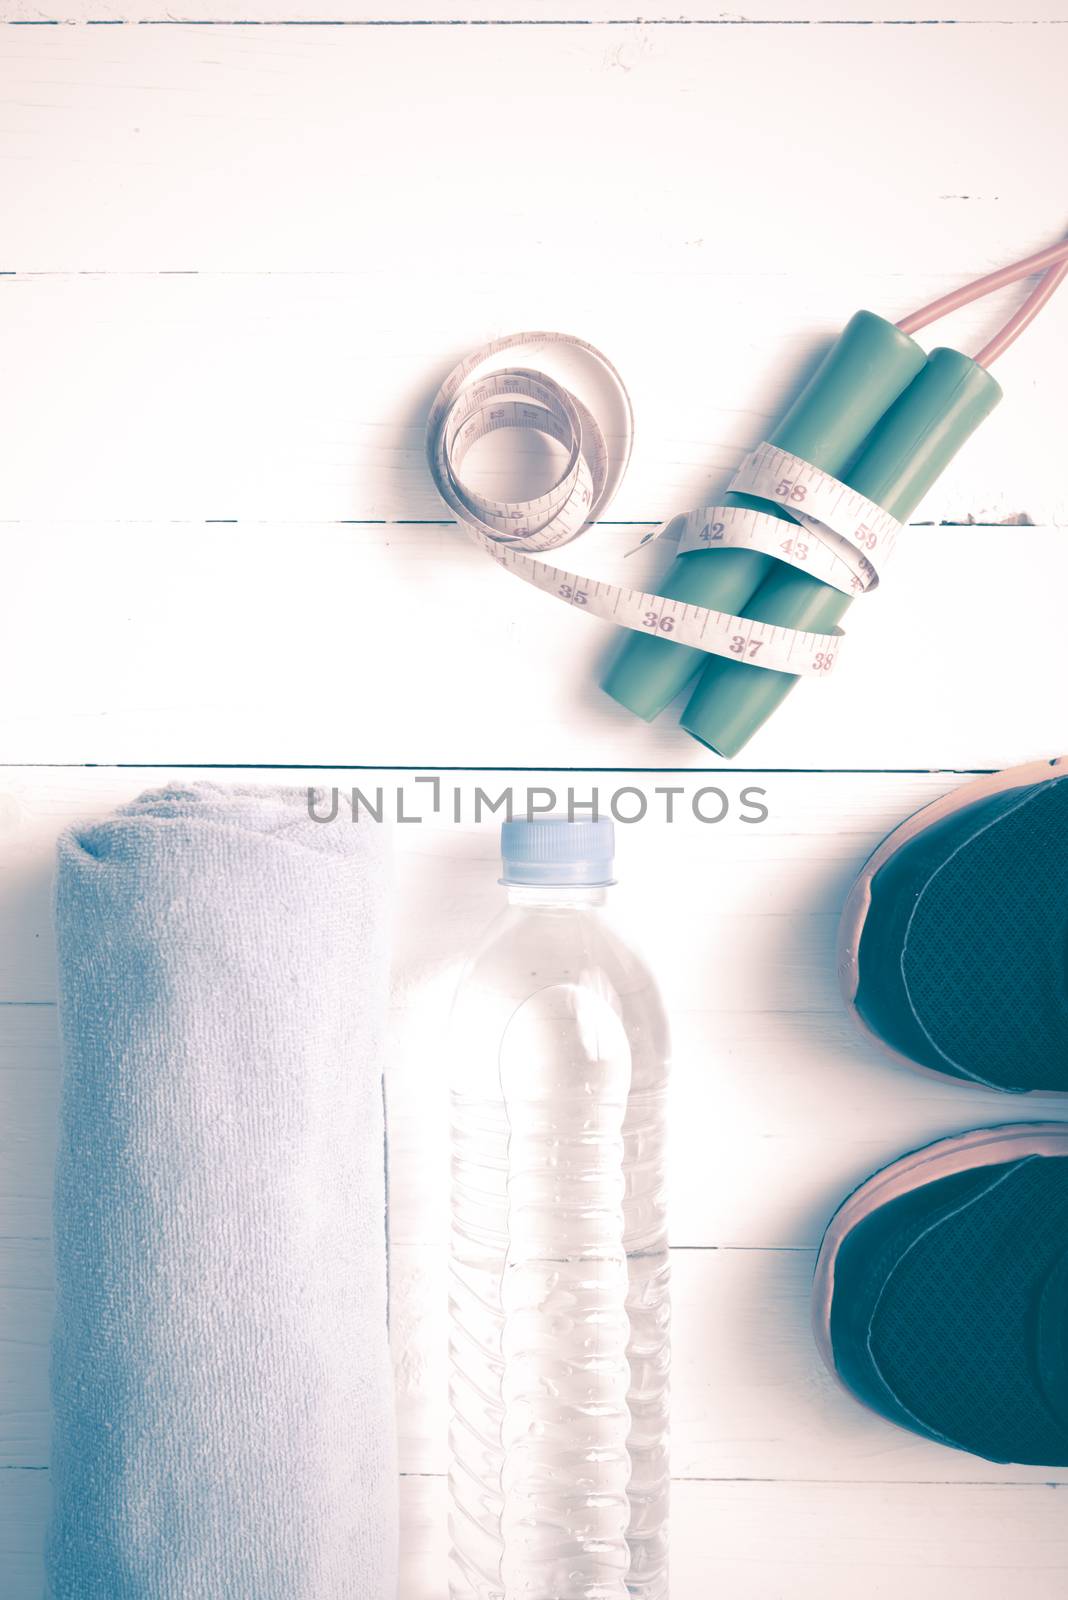 fitness equipment : running shoes,towel,jumping rope,water bottle and measuring tape on white wood table vintage style